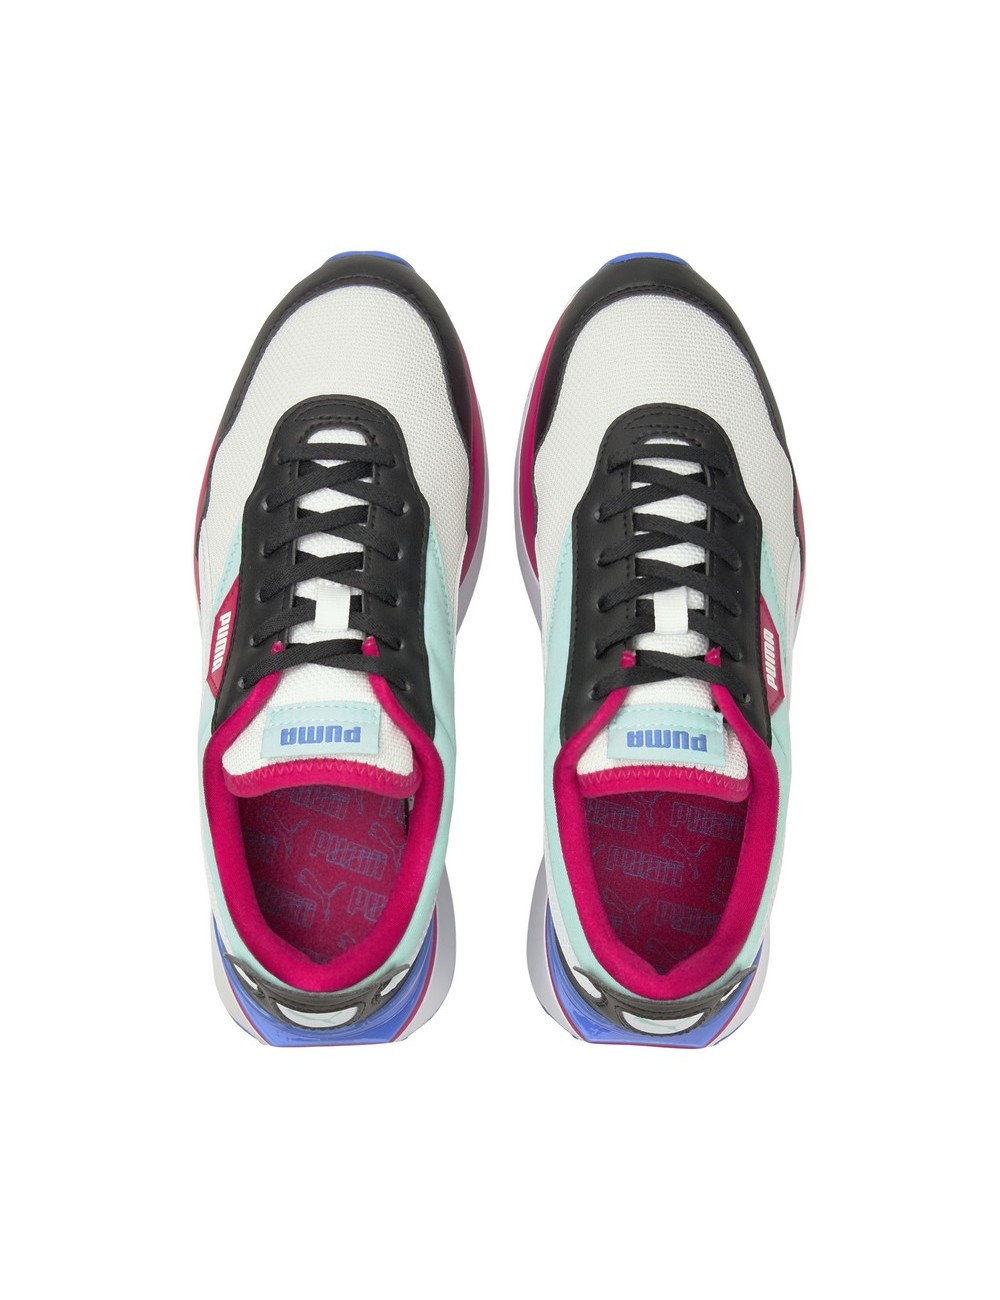 SNEAKERS MUJER PUMA CRUISE RIDER FLAIR